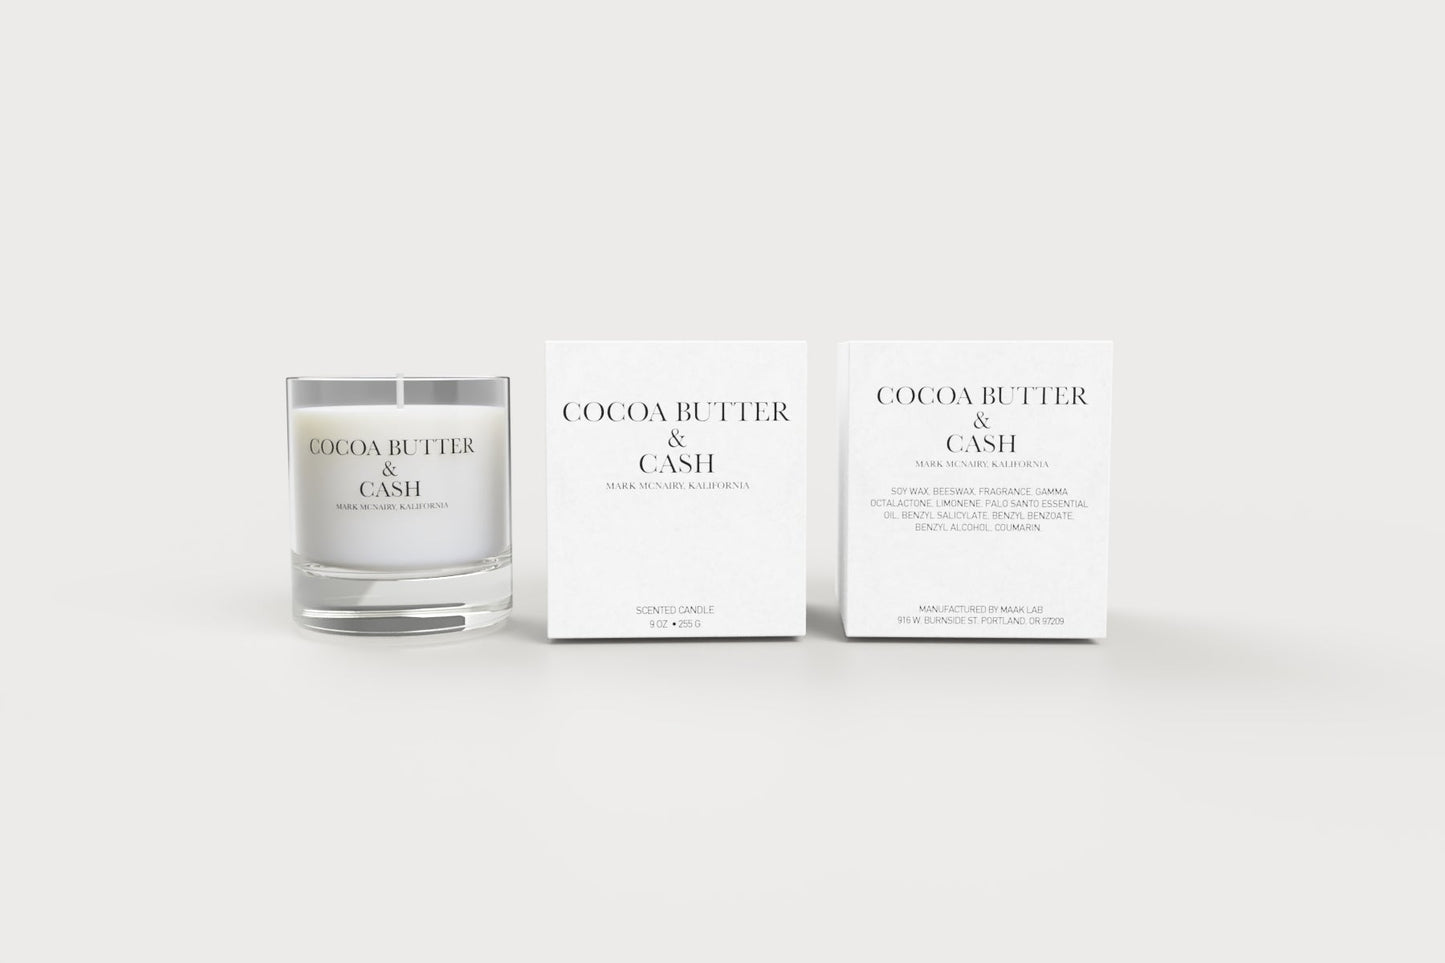 COCOA BUTTER & CASH CANDLE